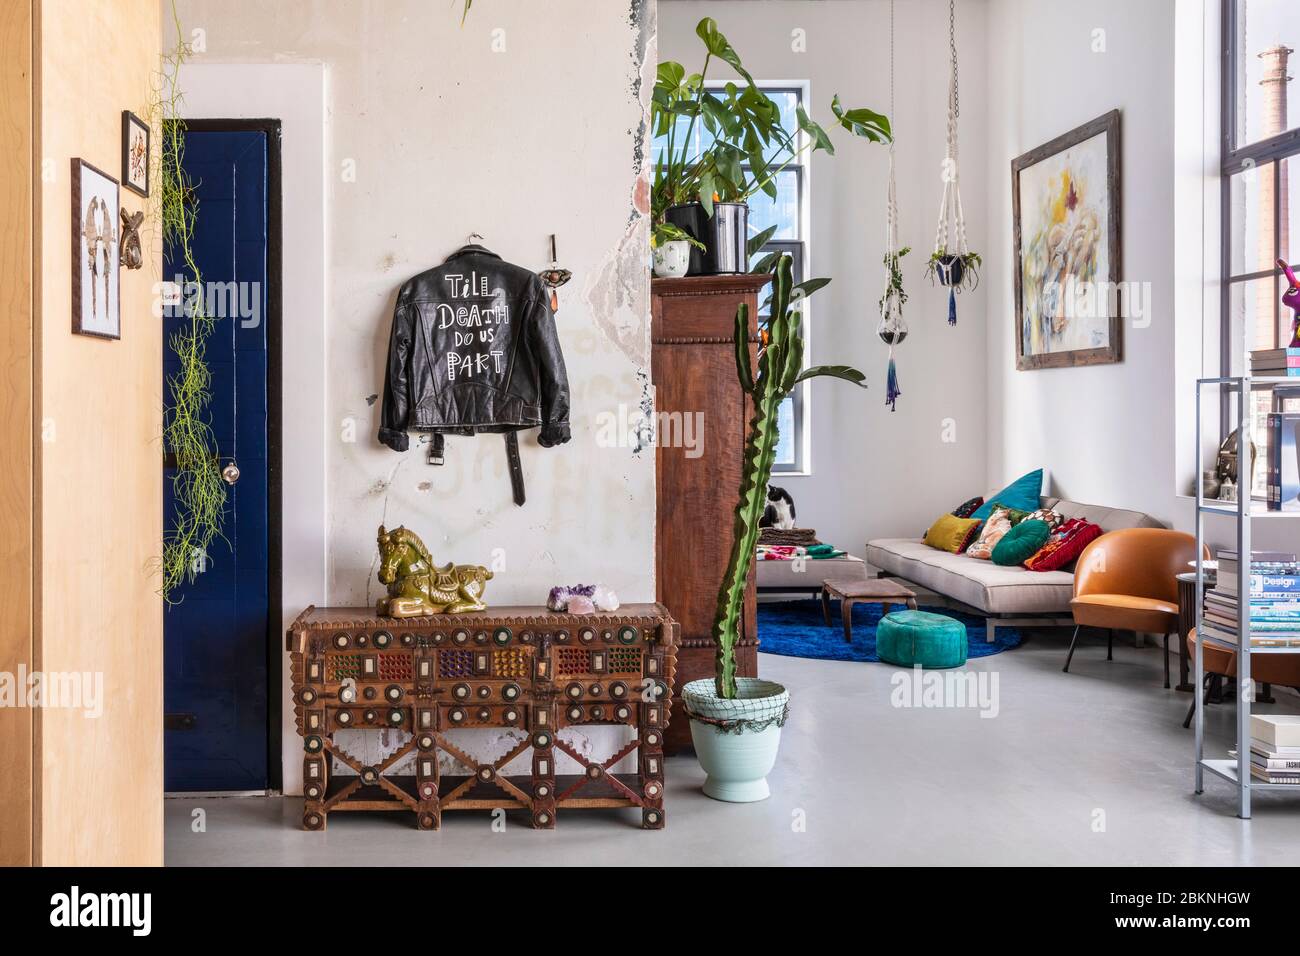 Eindhoven The Netherlands February 2nd 2020 An Industrial City Loft Interior A Bohemian Modern Mix And Match Eclectic Styled Living With Colorfu Stock Photo Alamy